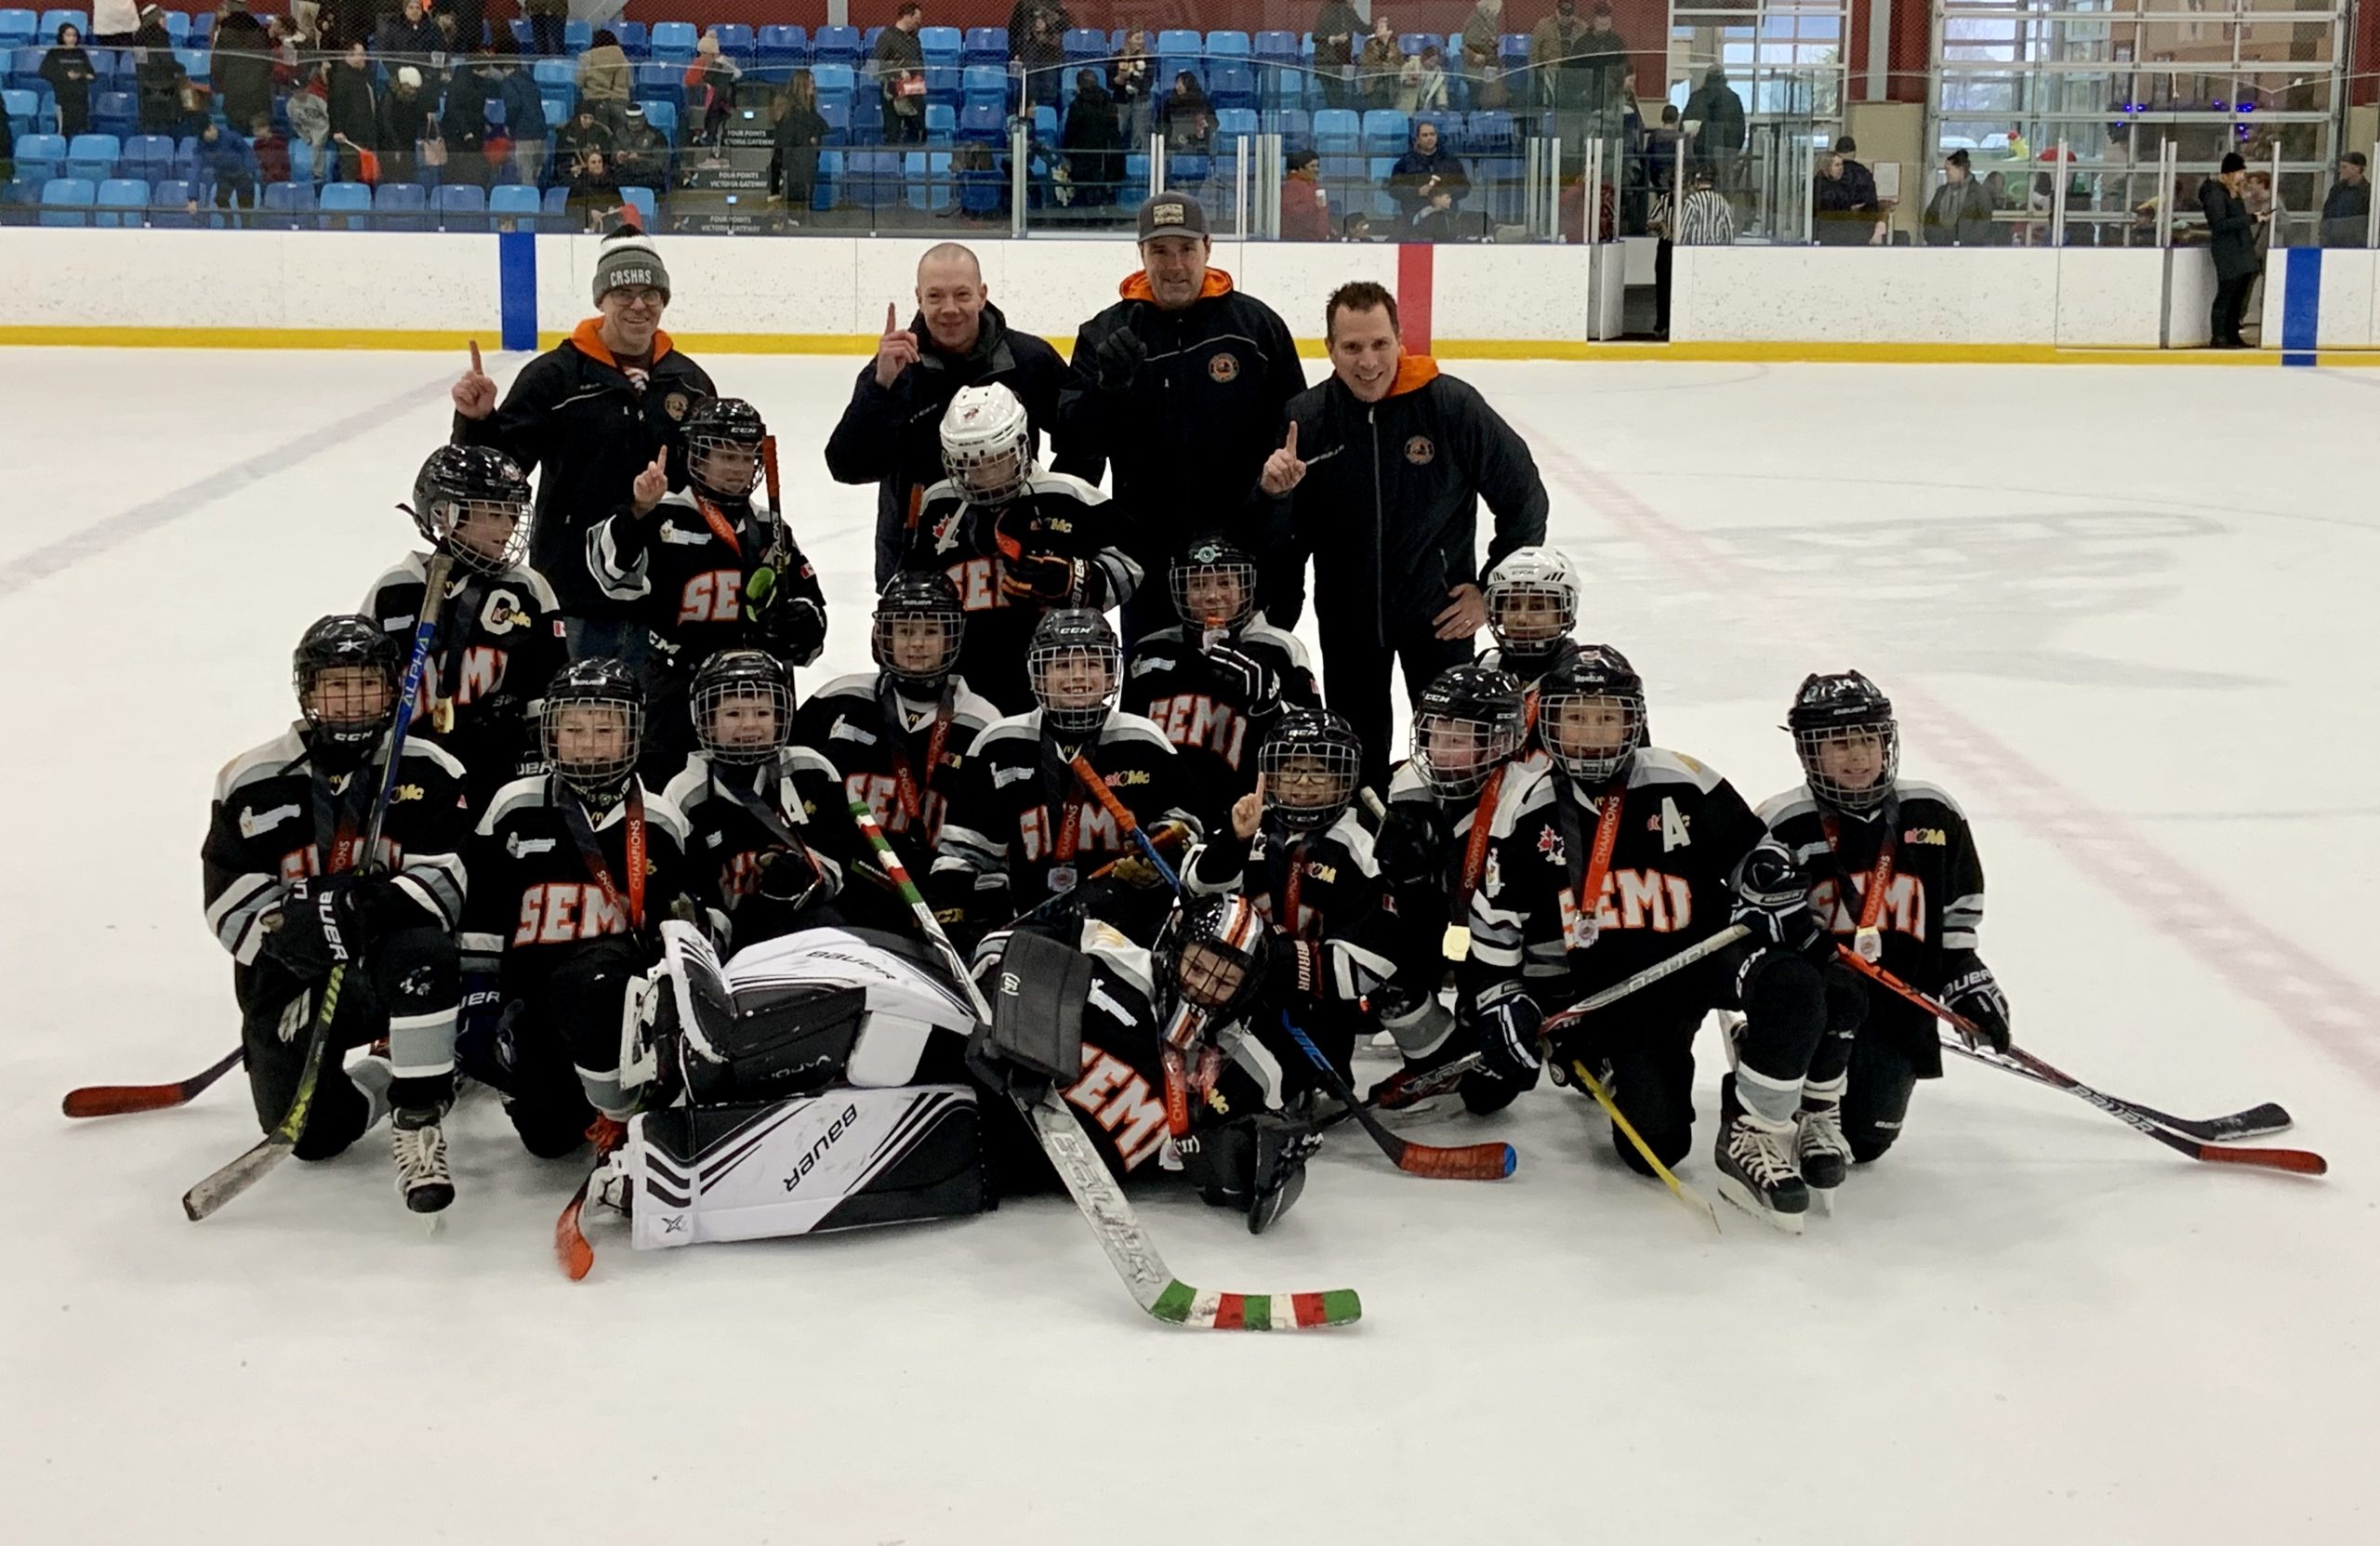 December 31, 2019 ~ Happy New Year! Atom C4 took home the gold form the JDF Tournament with a final score of 15-5! Way to go team!